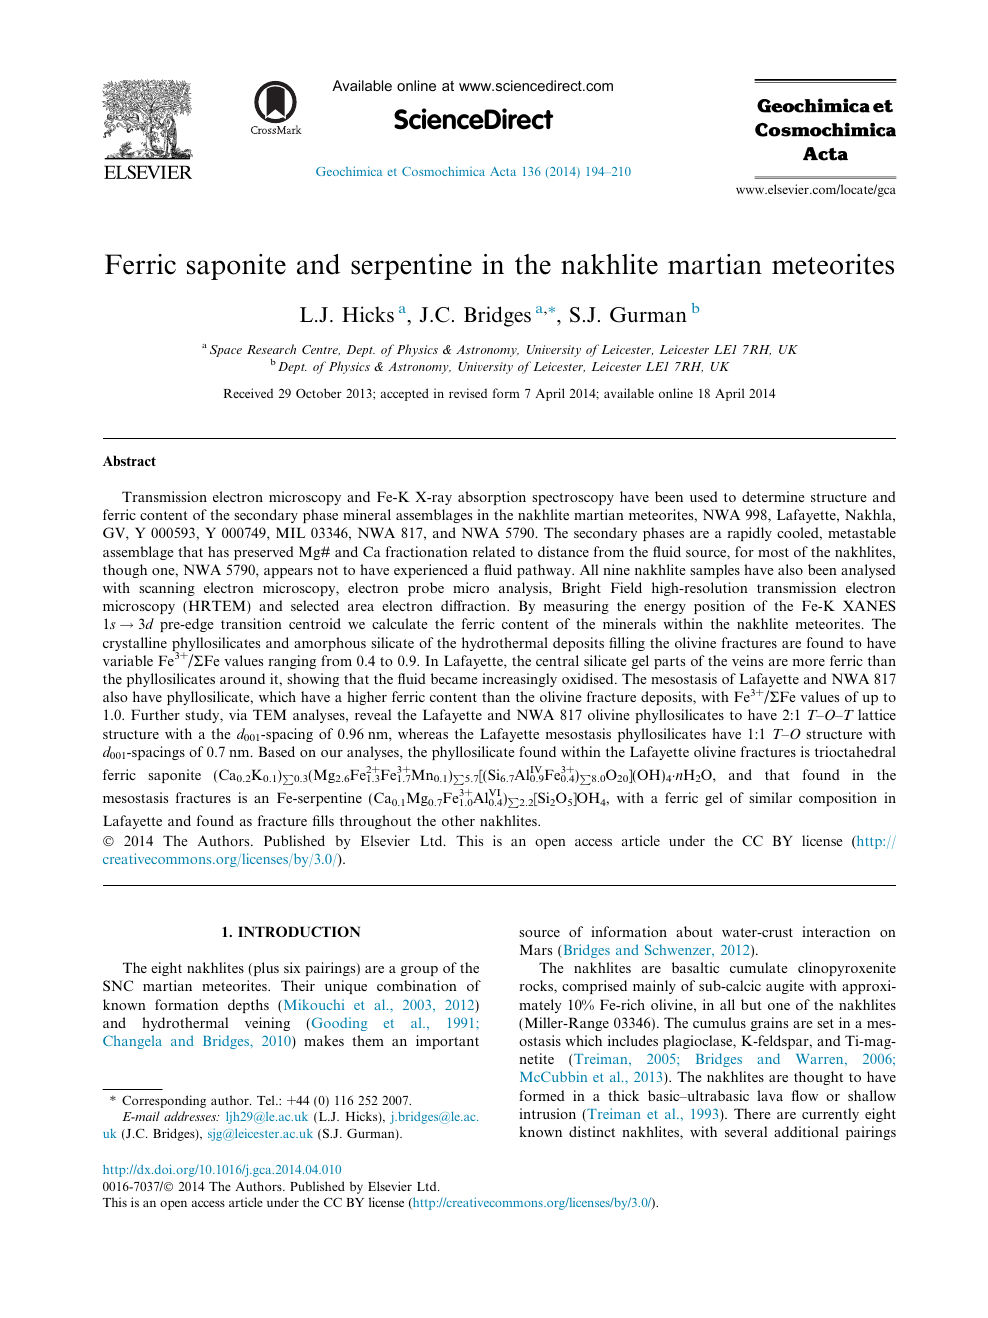 Ferric Saponite And Serpentine In The Nakhlite Martian Meteorites Topic Of Research Paper In Earth And Related Environmental Sciences Download Scholarly Article Pdf And Read For Free On Cyberleninka Open Science